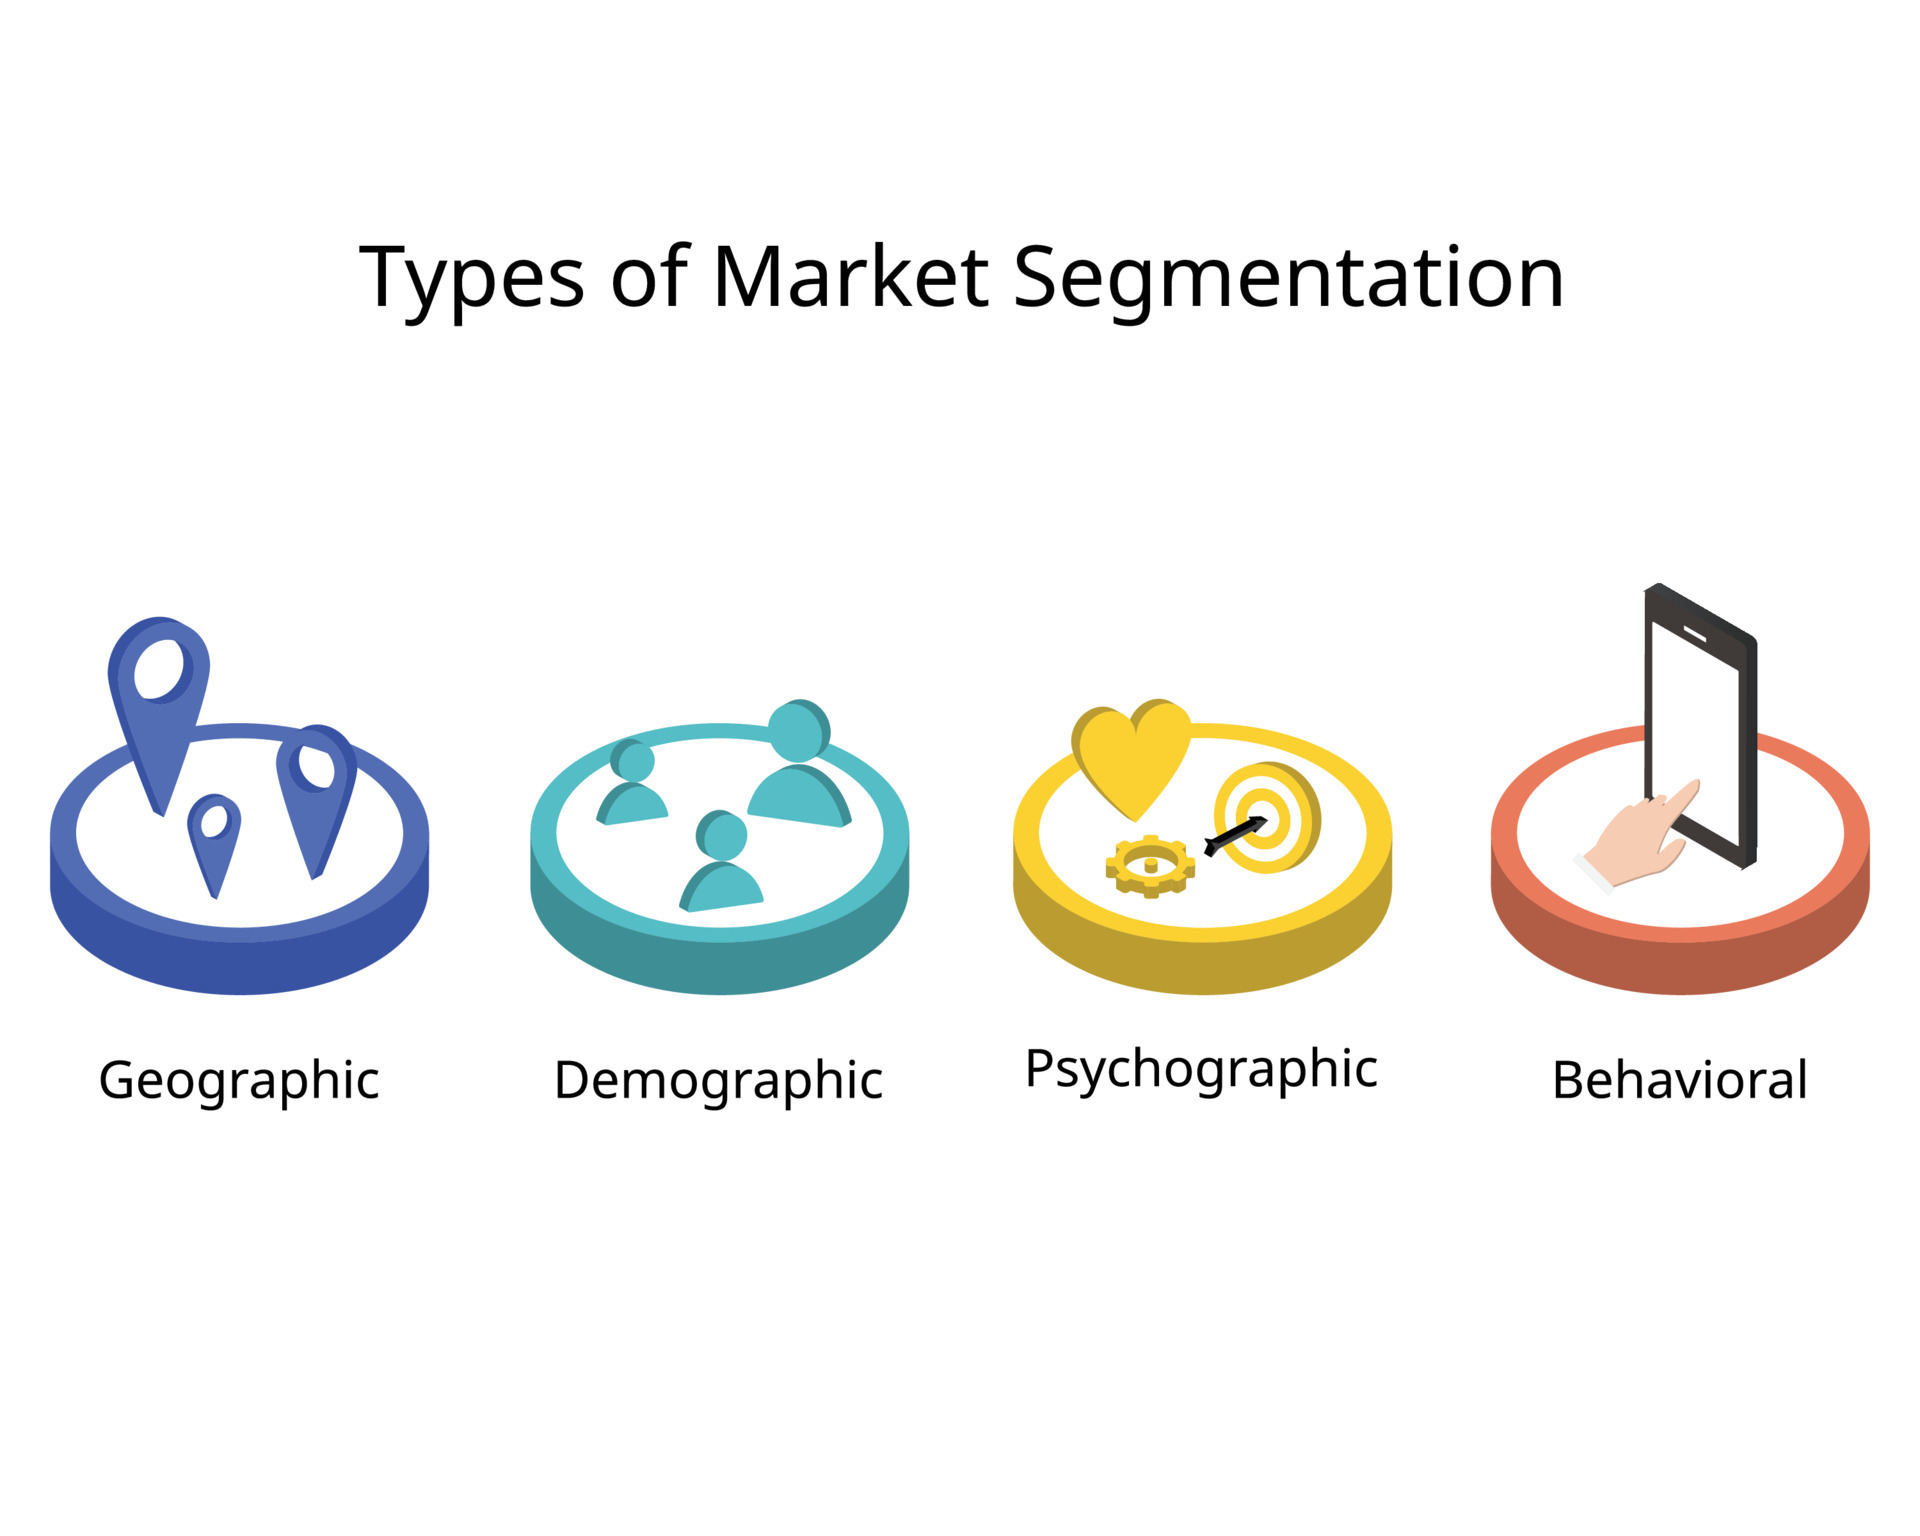 What Are The 4 Types Of Market Segmentation